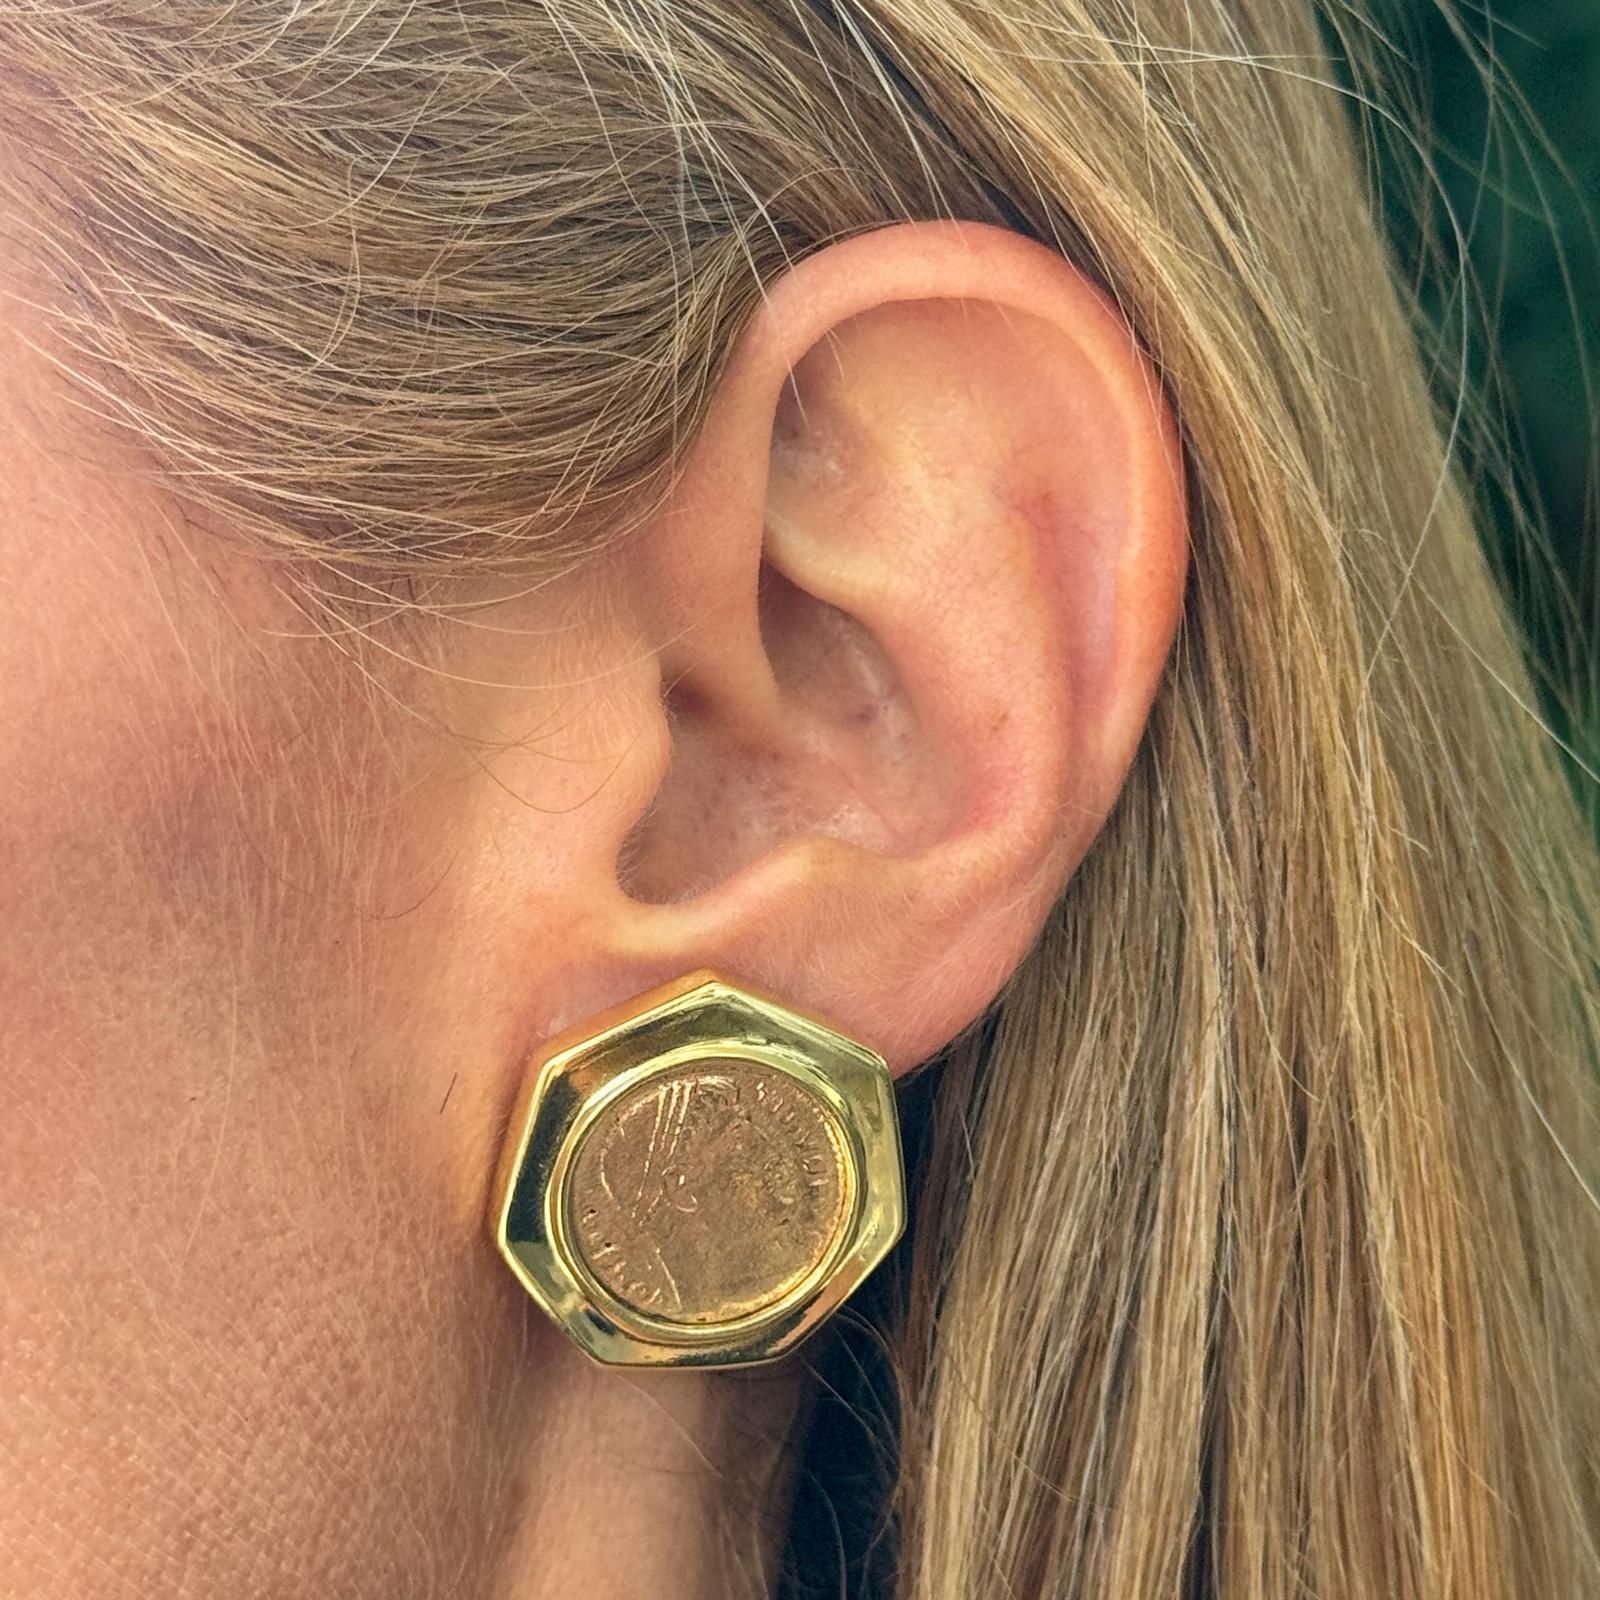 Coin vintage earrings crafted in 18 karat yellow gold (14 karat yellow gold cufflink findings). The earrings feature copper coins encased in a heptagon shape with leverback posts. The earrings measure 1.00 x 1.00 inch.